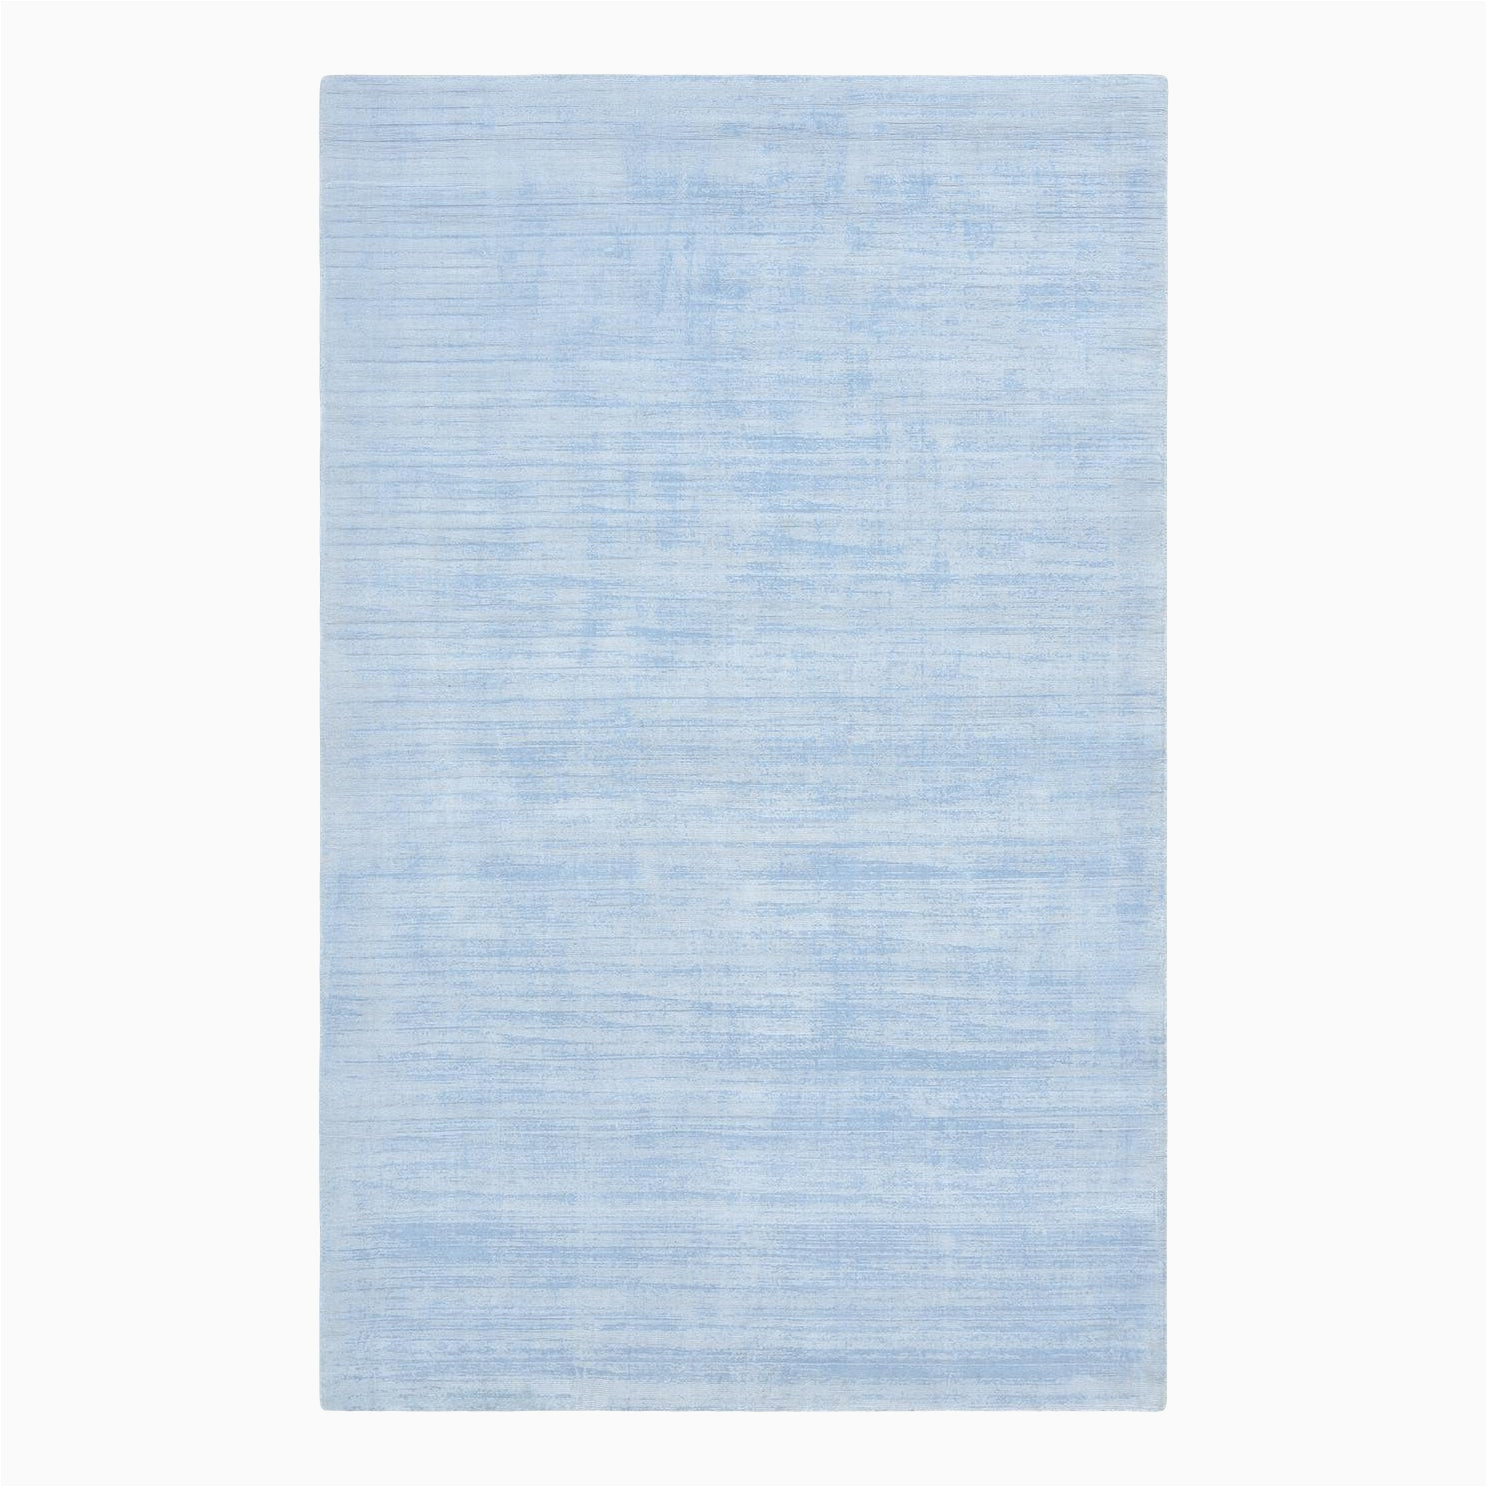 Solid Blue Rug 8×10 Milo, Contemporary solid Hand Loomed area Rug, Light Blue, 8 X 10